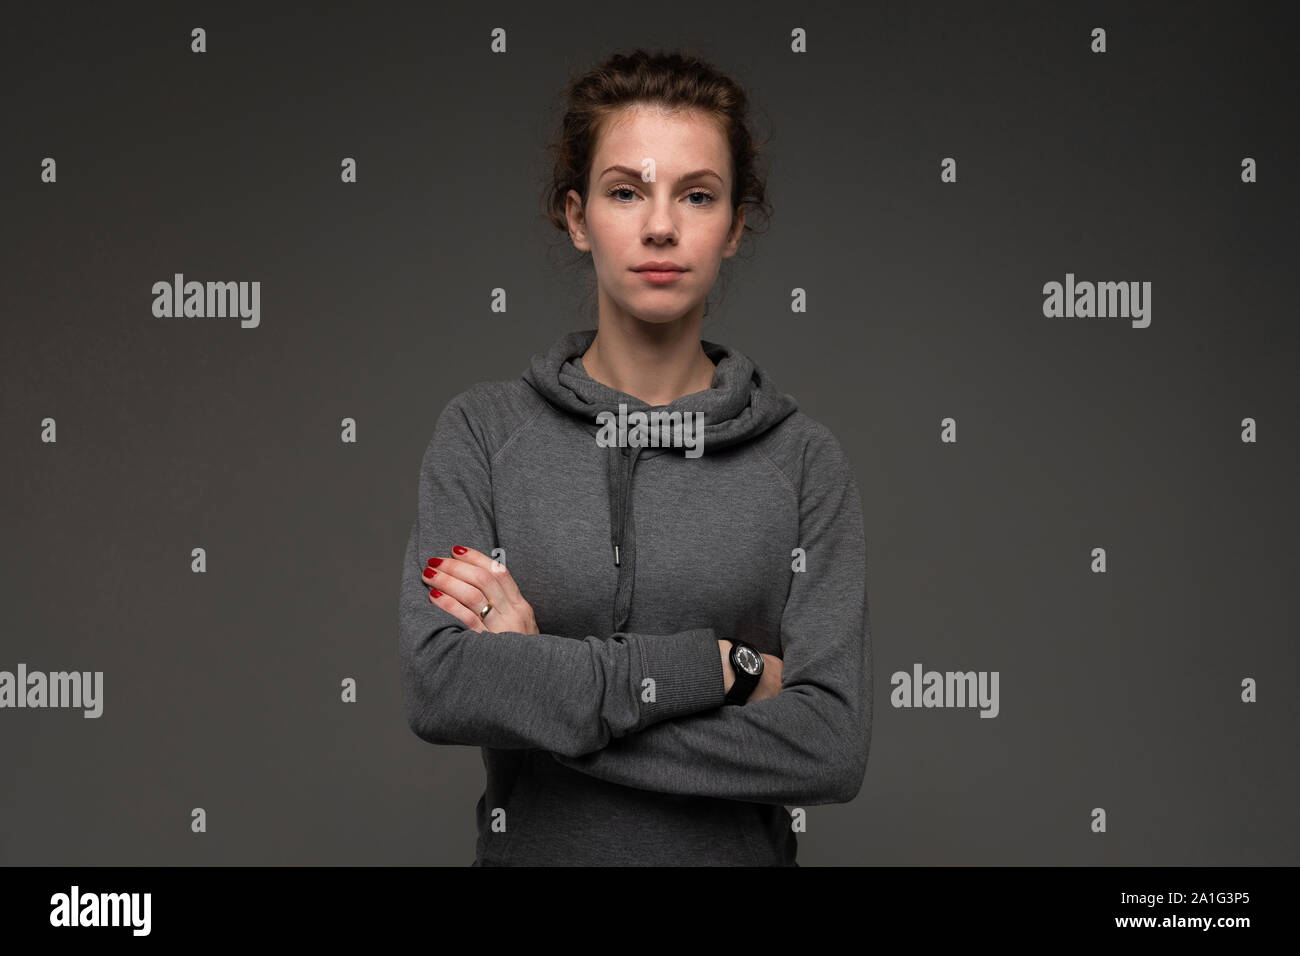 Portrait of young woman in grey hoodie against gloomy backdrop isolated Stock Photo